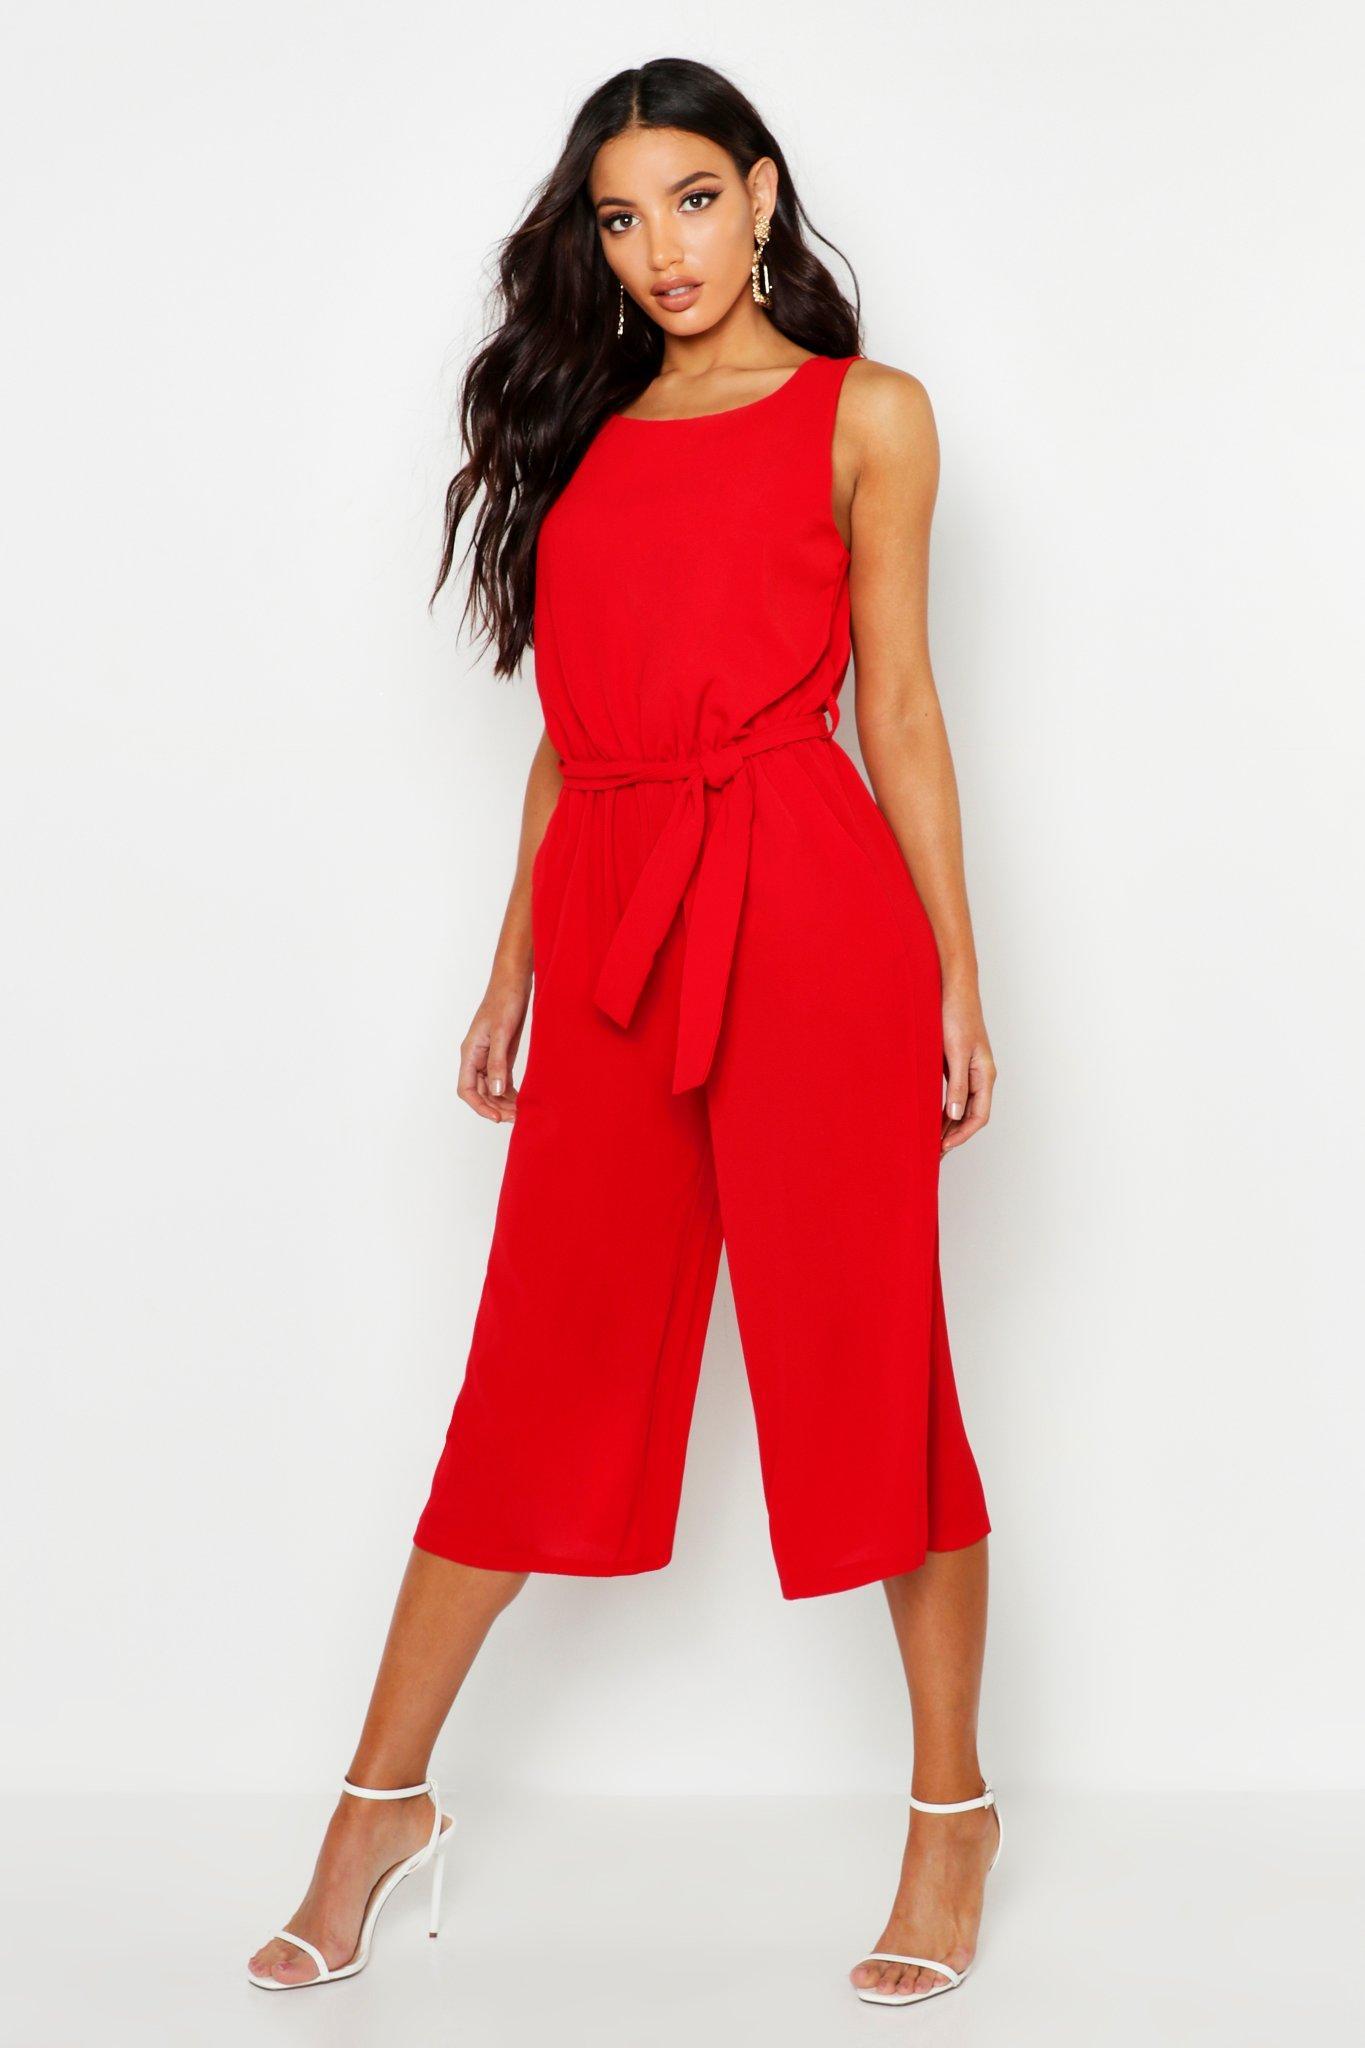 Lyst - Boohoo Culotte Jumpsuit in Red